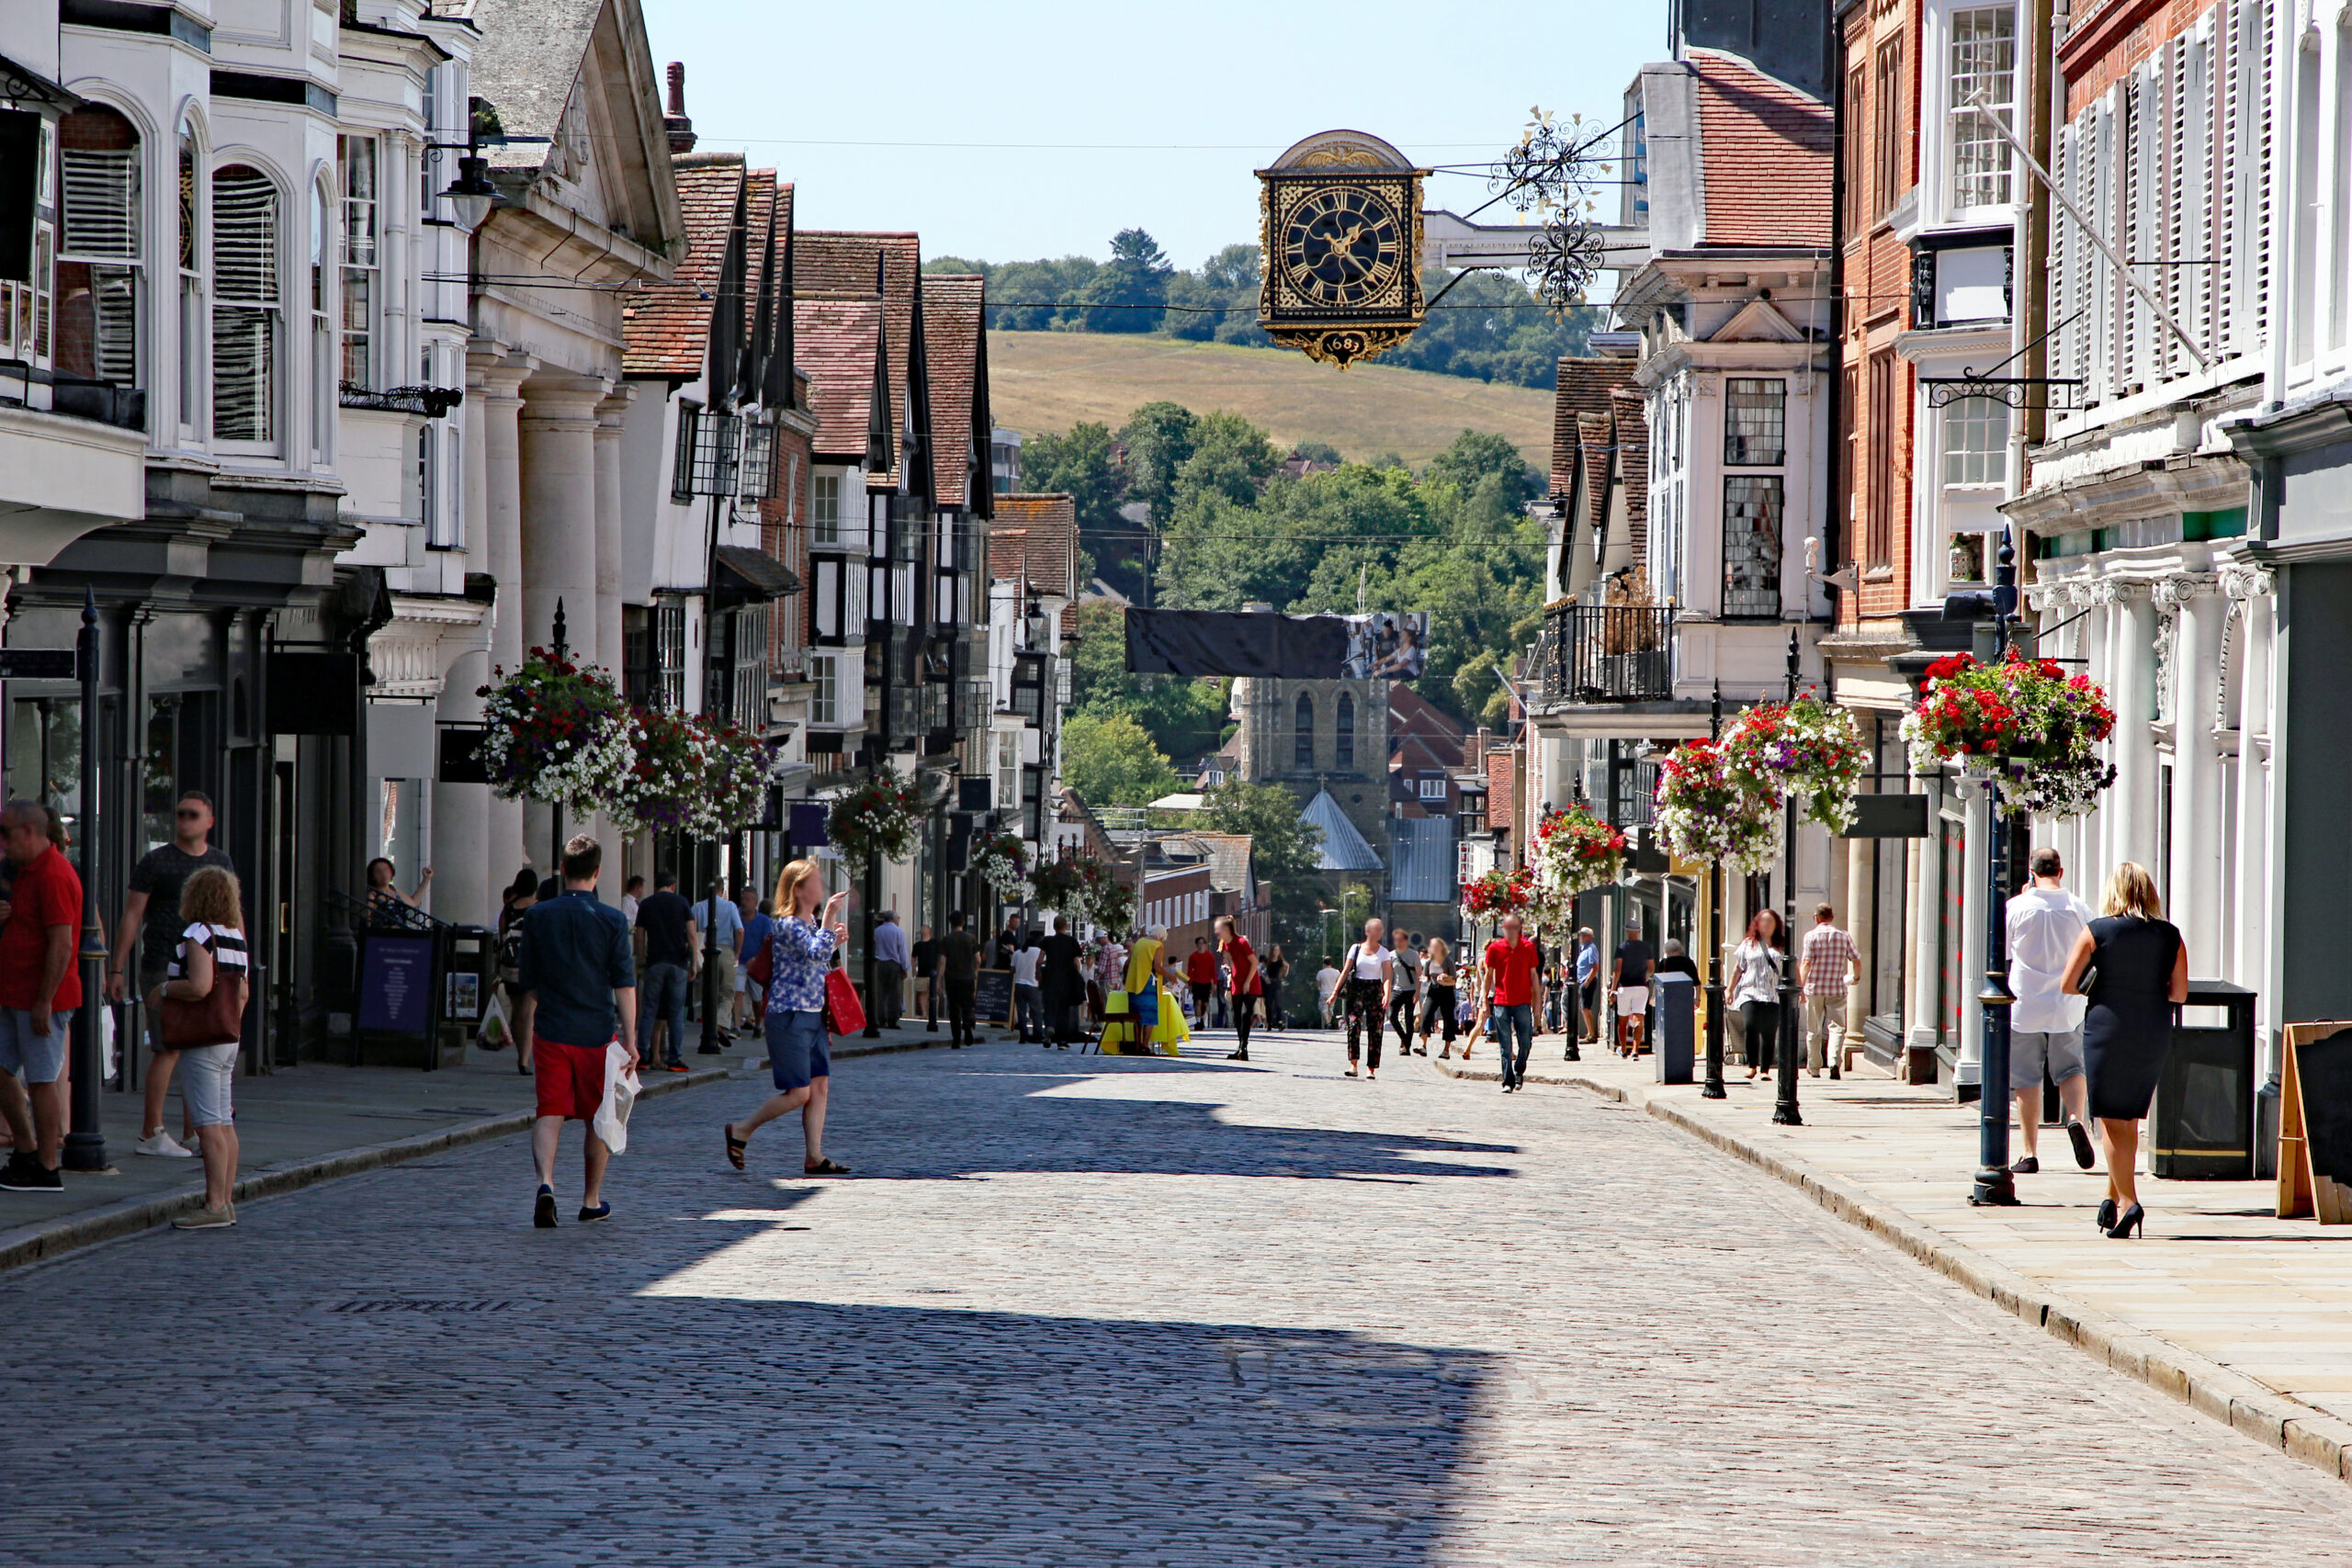 Guildford’s cobbled high street bustling with anonymised shops